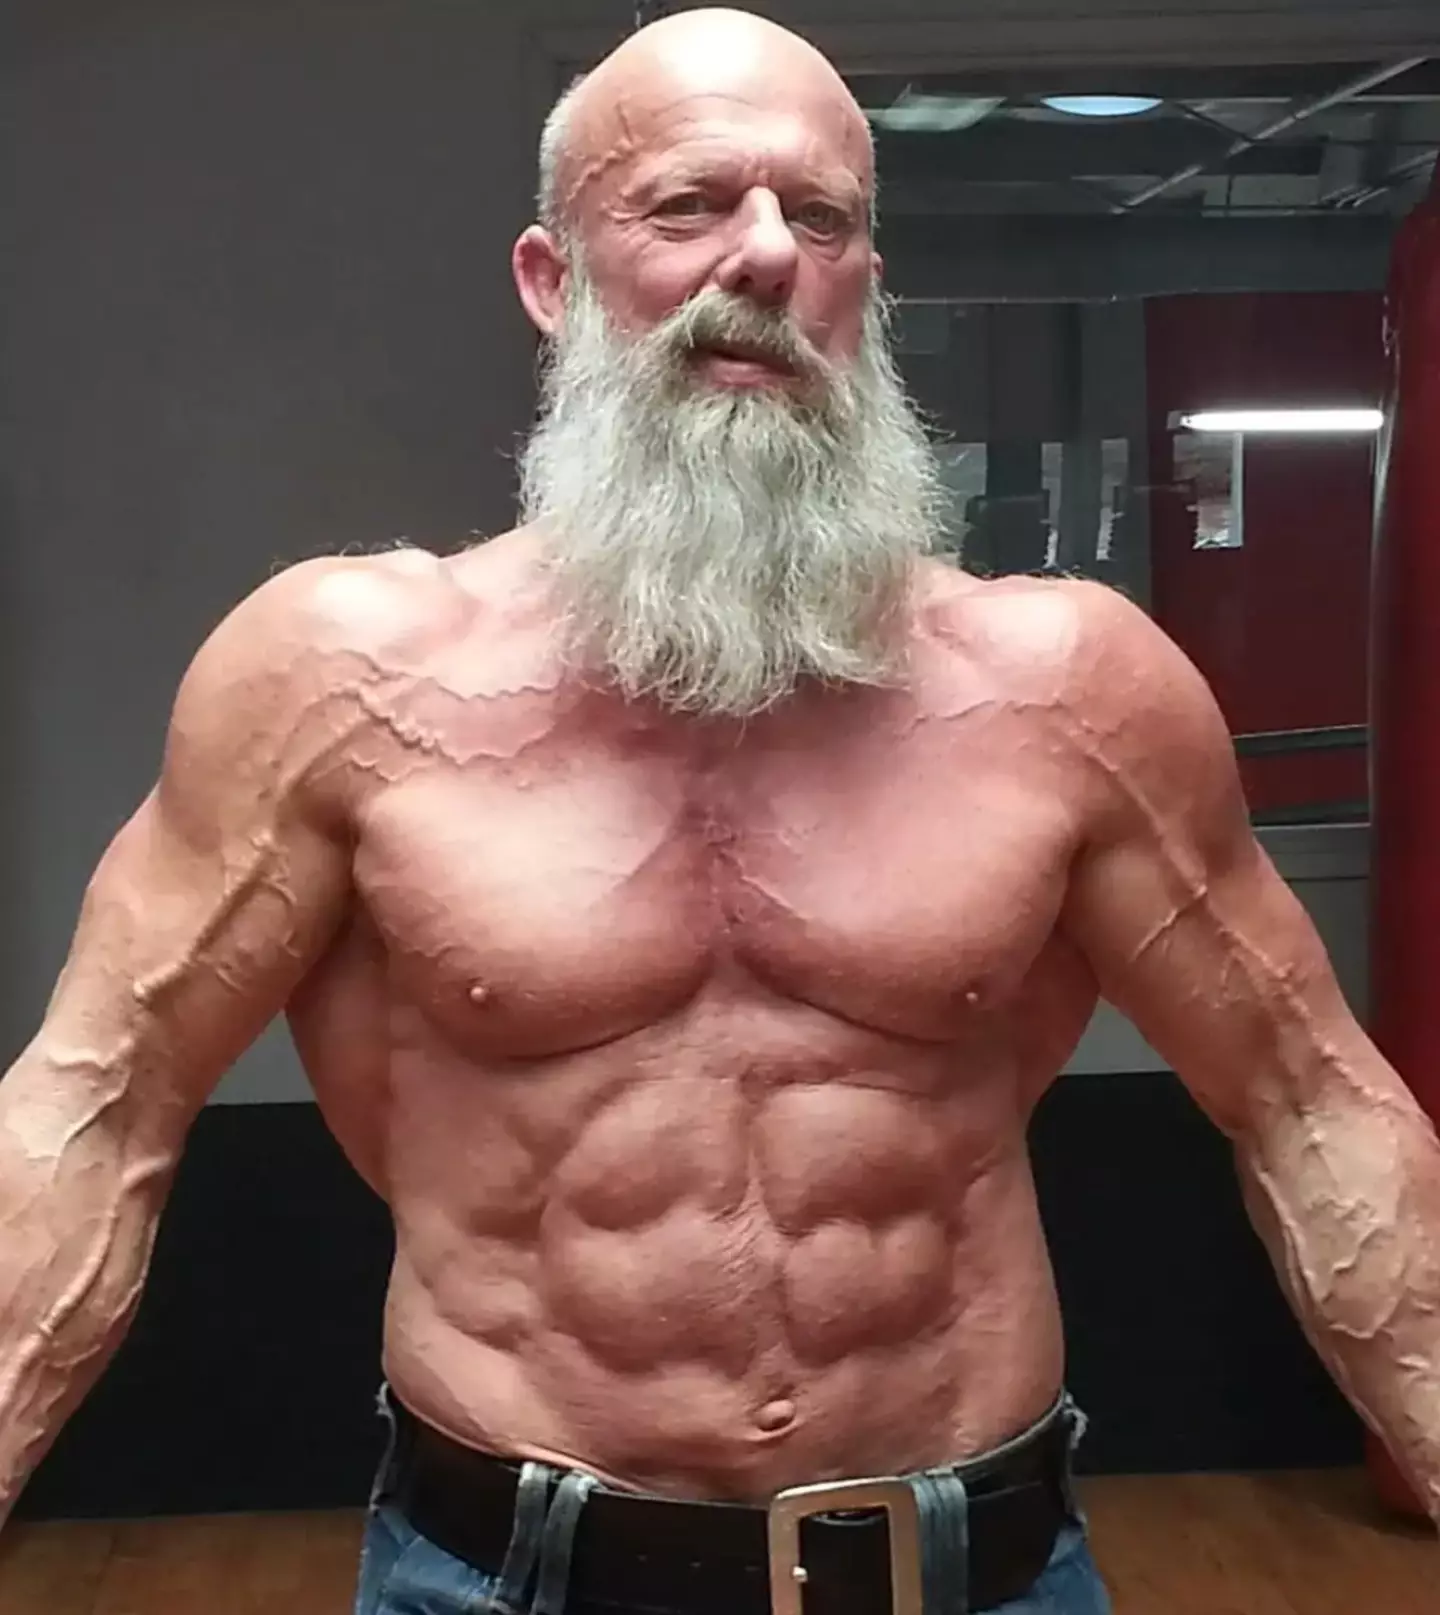 The grandpa is inspiring people with their own fitness journeys.